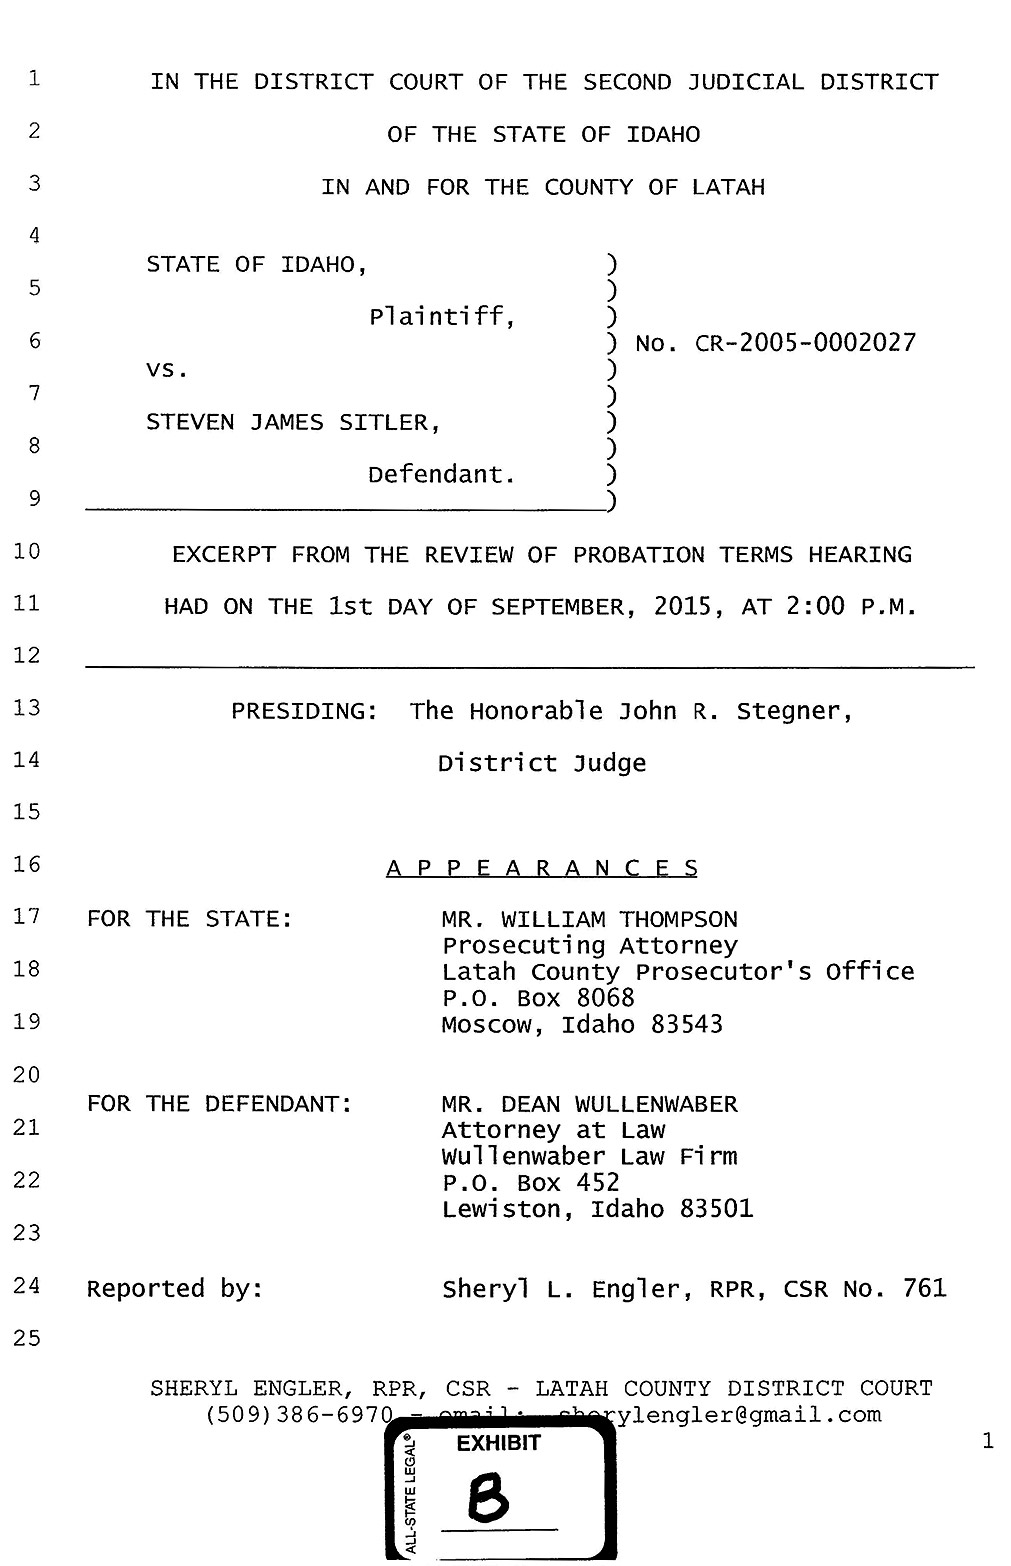 Exhibit B: Excerpted Court Transcript, page 1